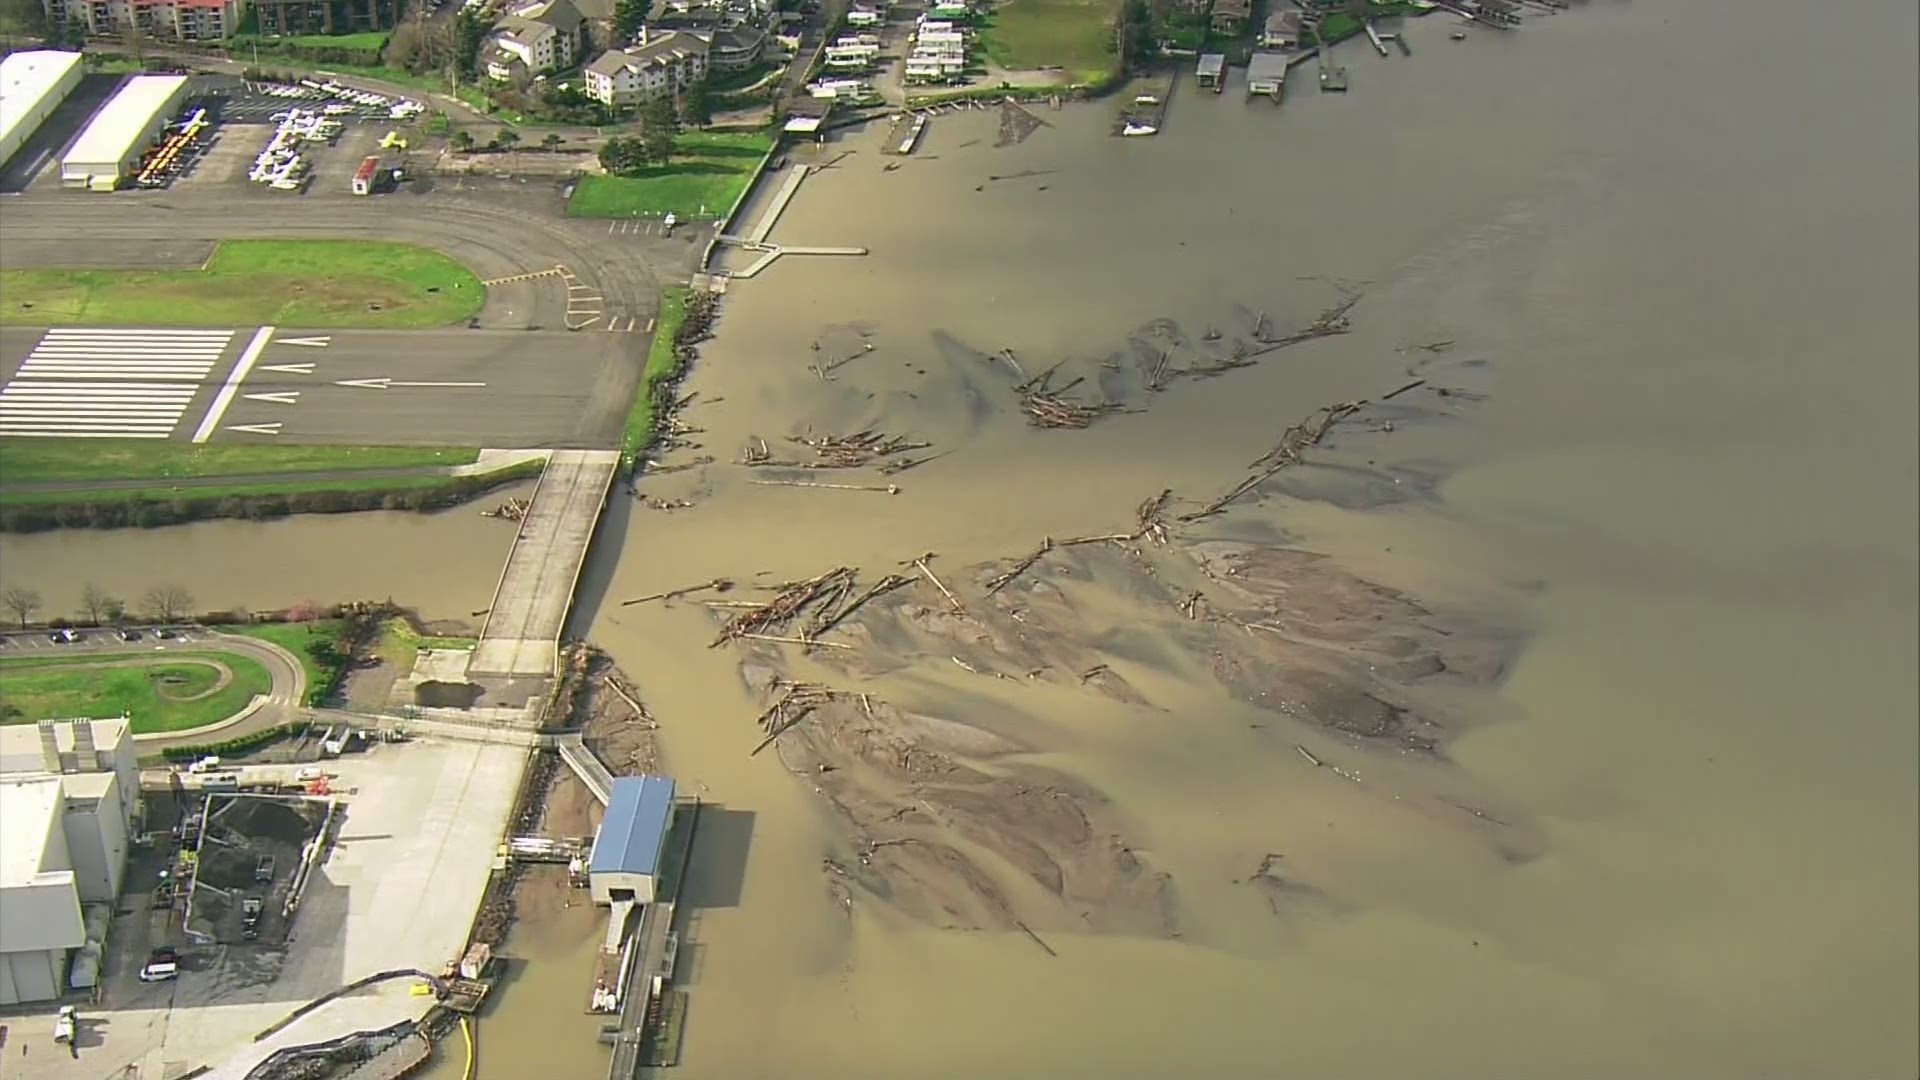 Large logs have ended up in Lake Washington due to Cedar River flooding.